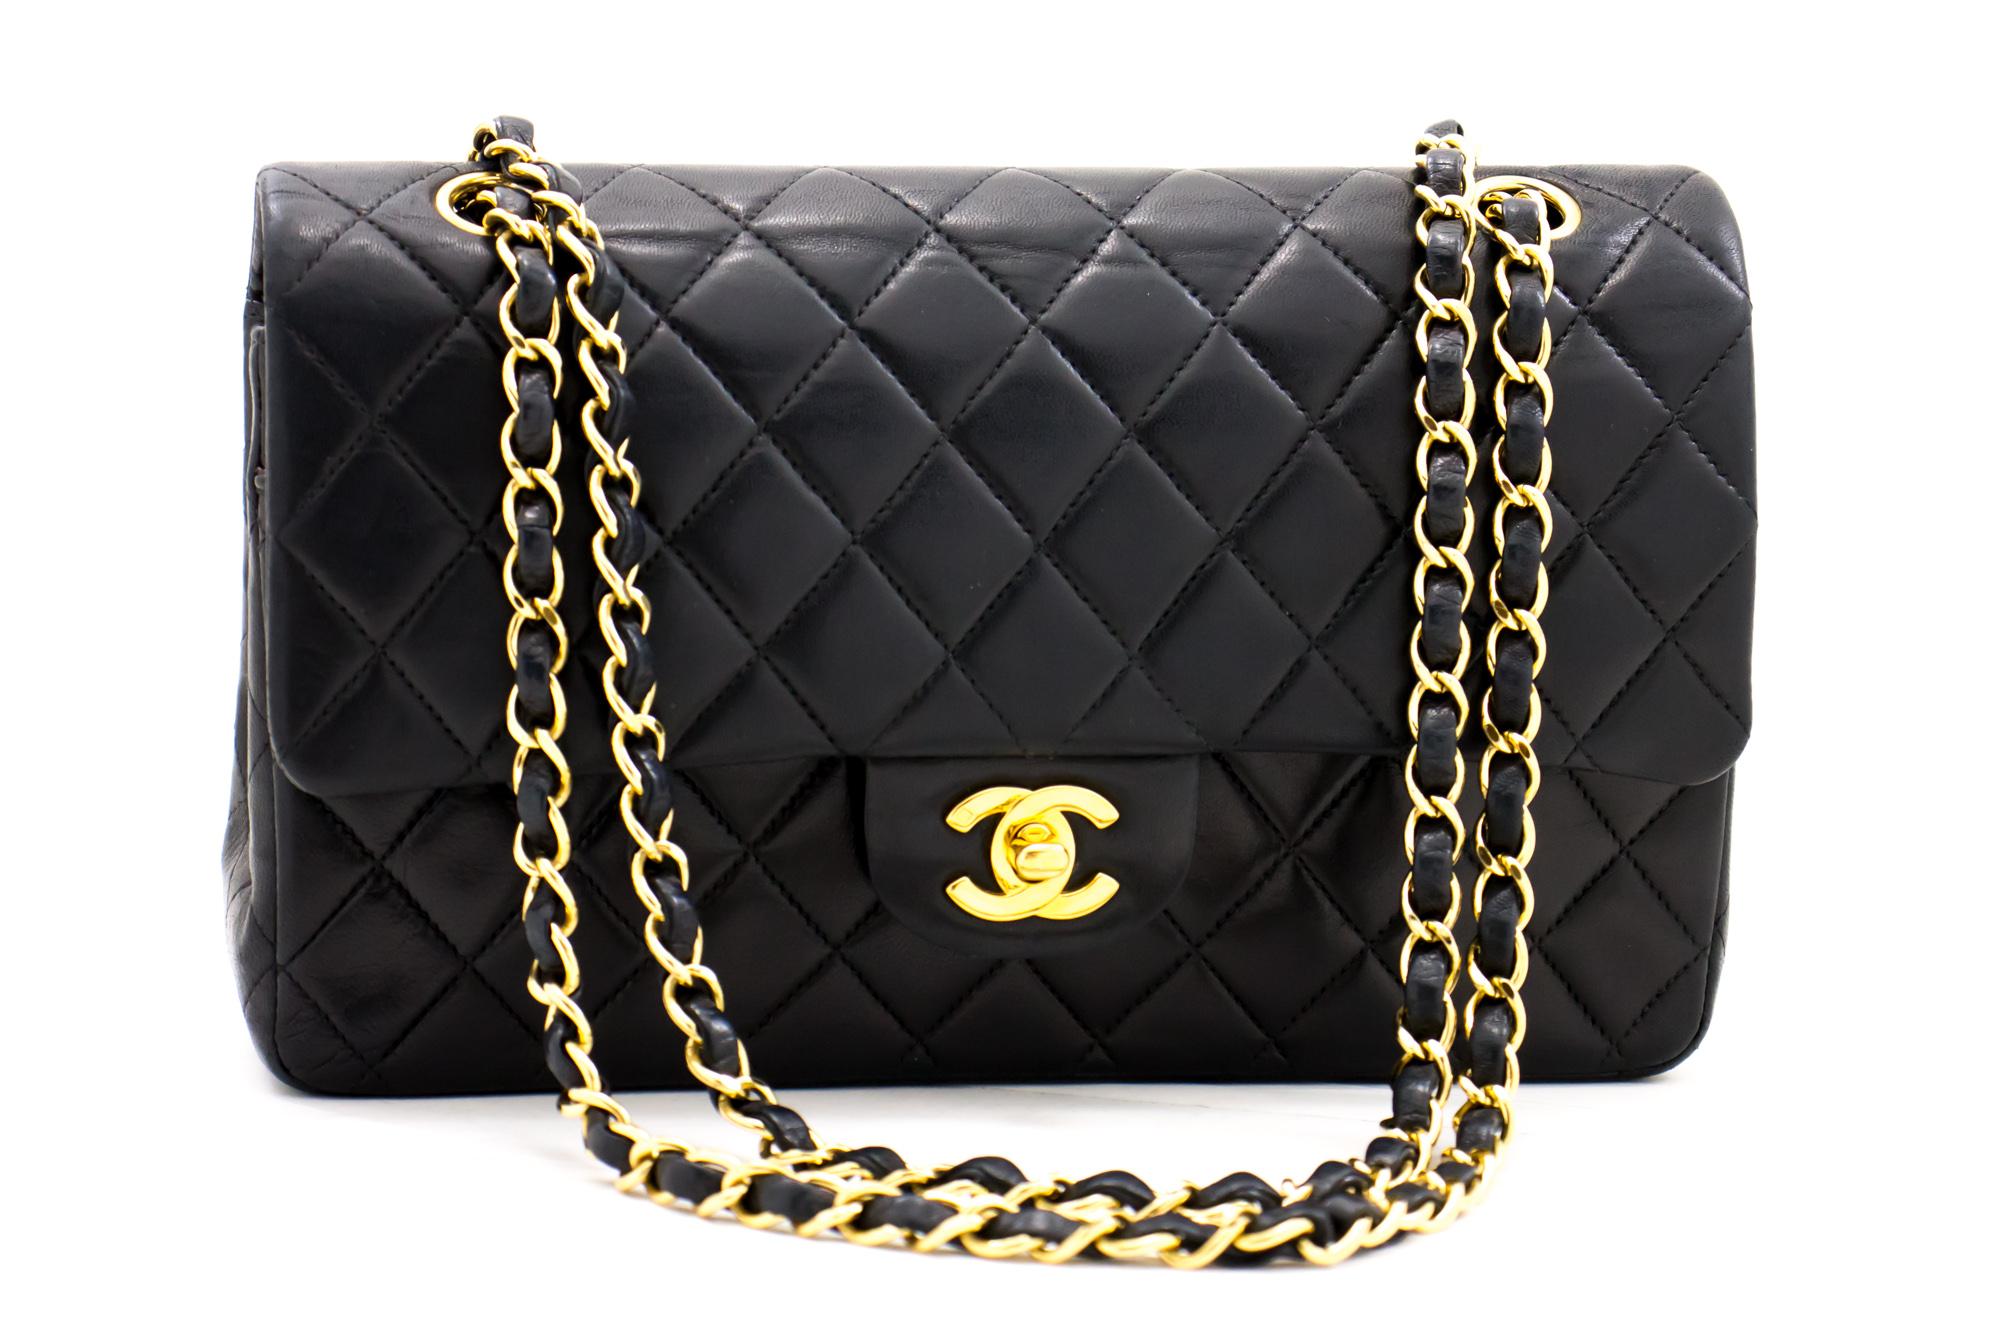 An authentic CHANEL 2.55 Classic Double Flap Medium Chain Shoulder Bag Black made of black Lambskin. The color is Black. The outside material is Leather. The pattern is Solid. This item is Contemporary. The year of manufacture would be 2 0 0 1